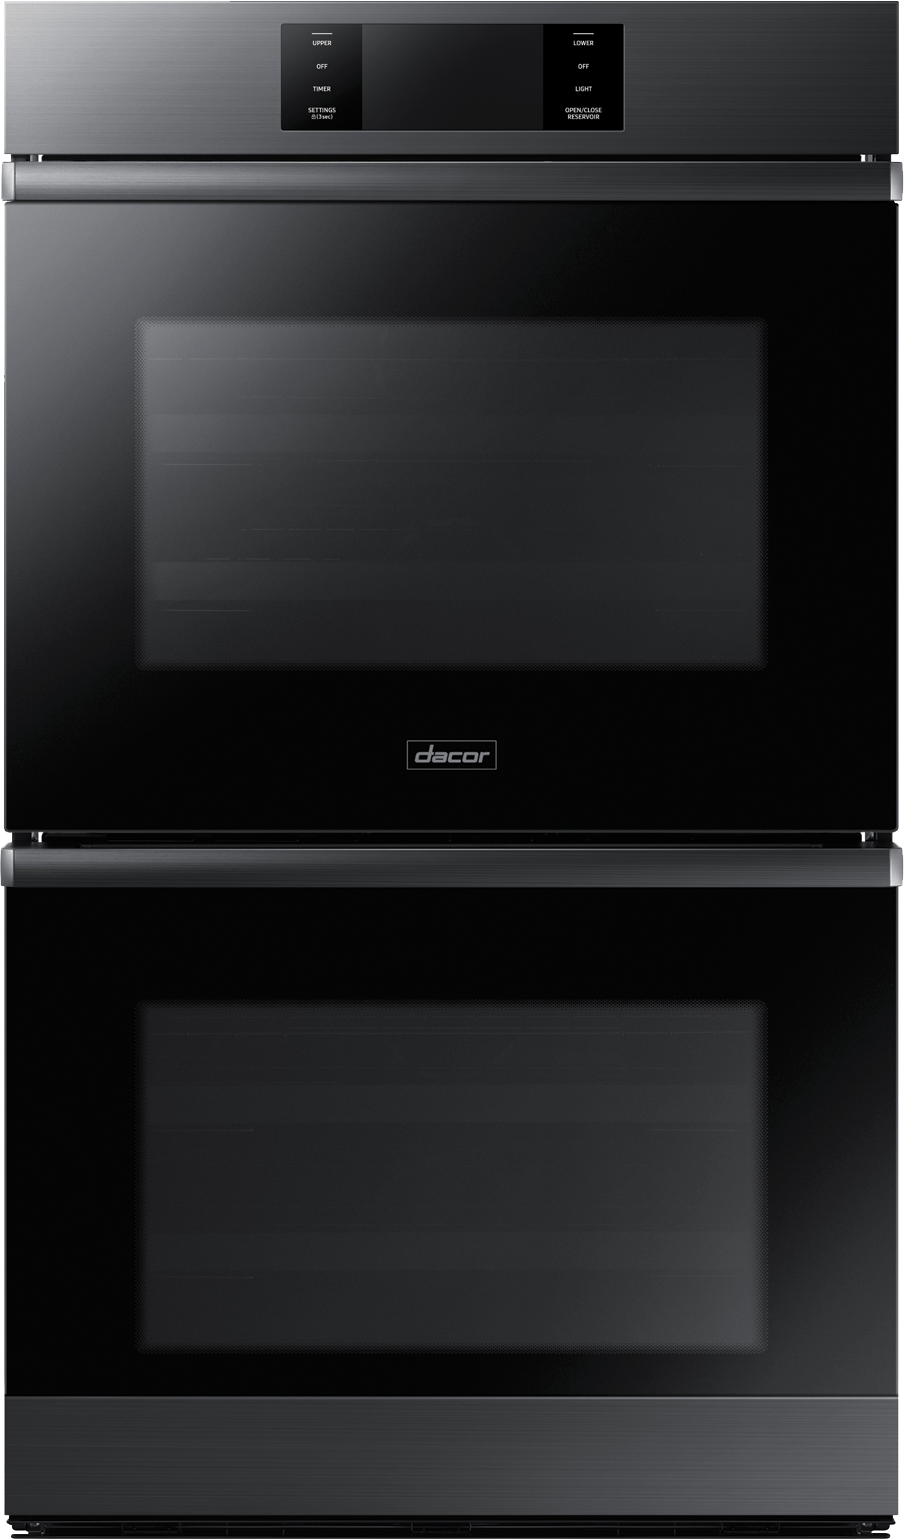 Contemporary 30"" Double Electric Steam Oven - Dacor DOB30M977DM